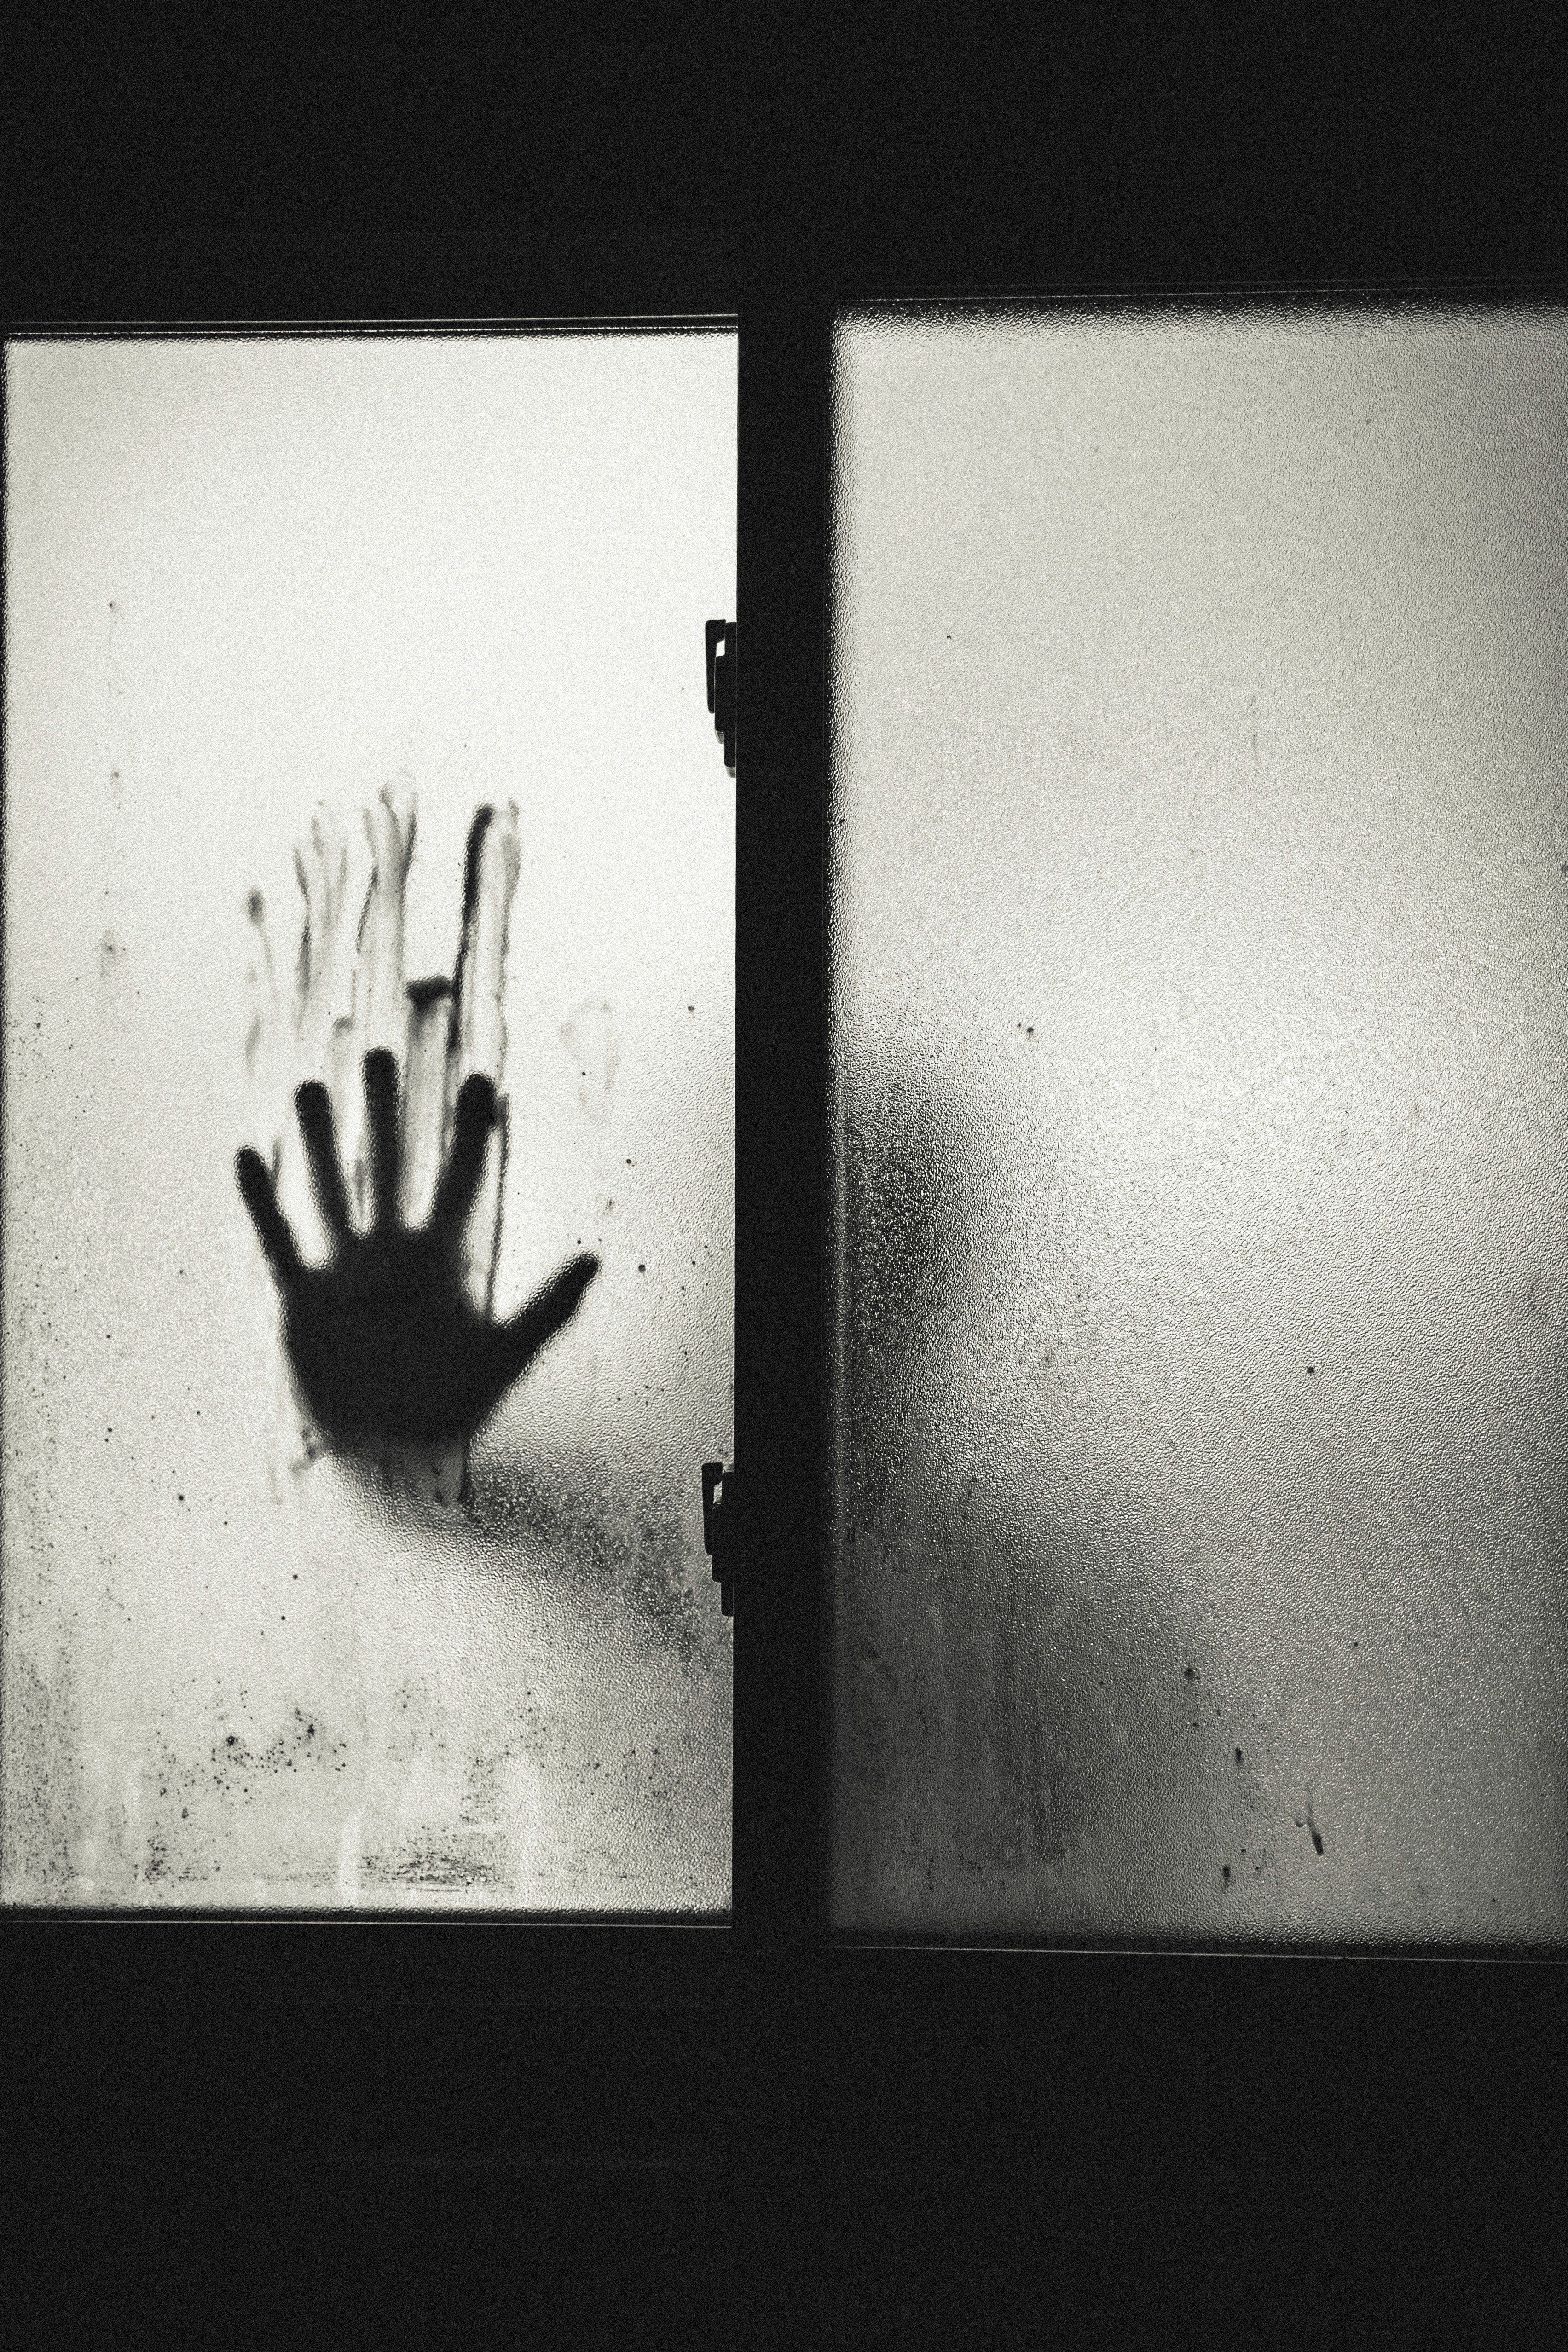 hand silhouette of victim a violent crime -victim in the shower